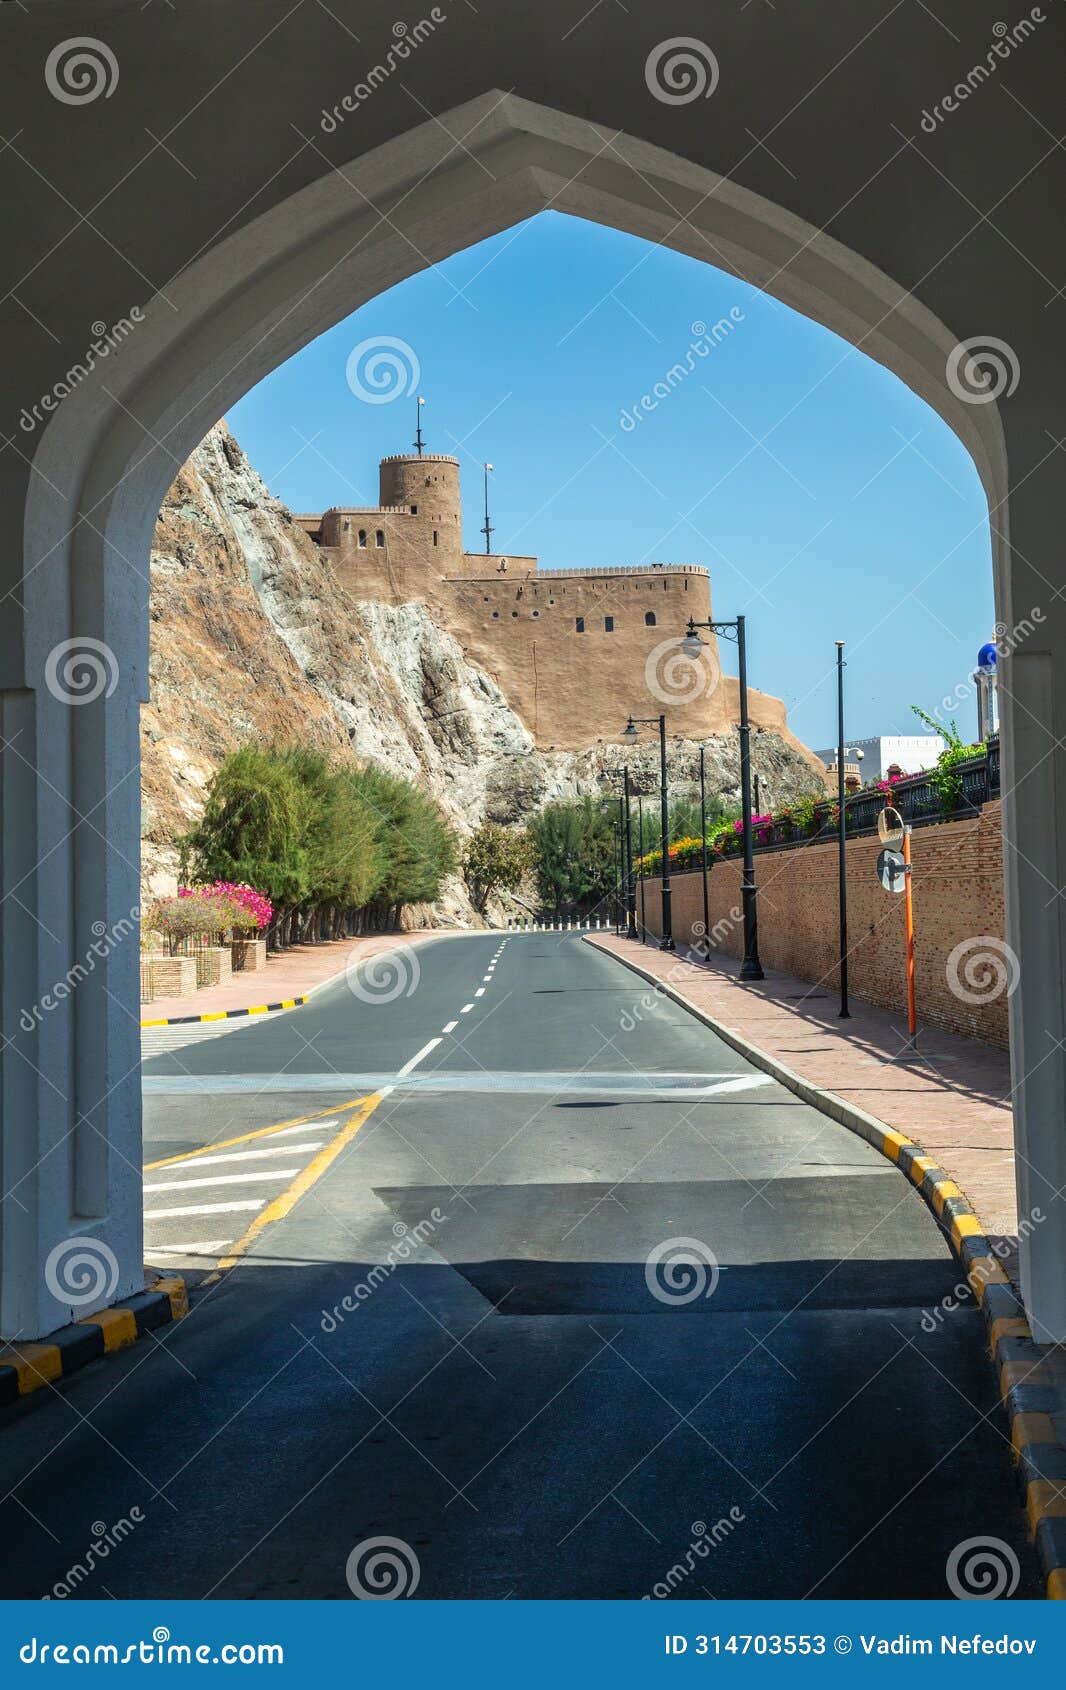 view from the arch to the al mirani castle on the rock standing on the rock, muscat, oman